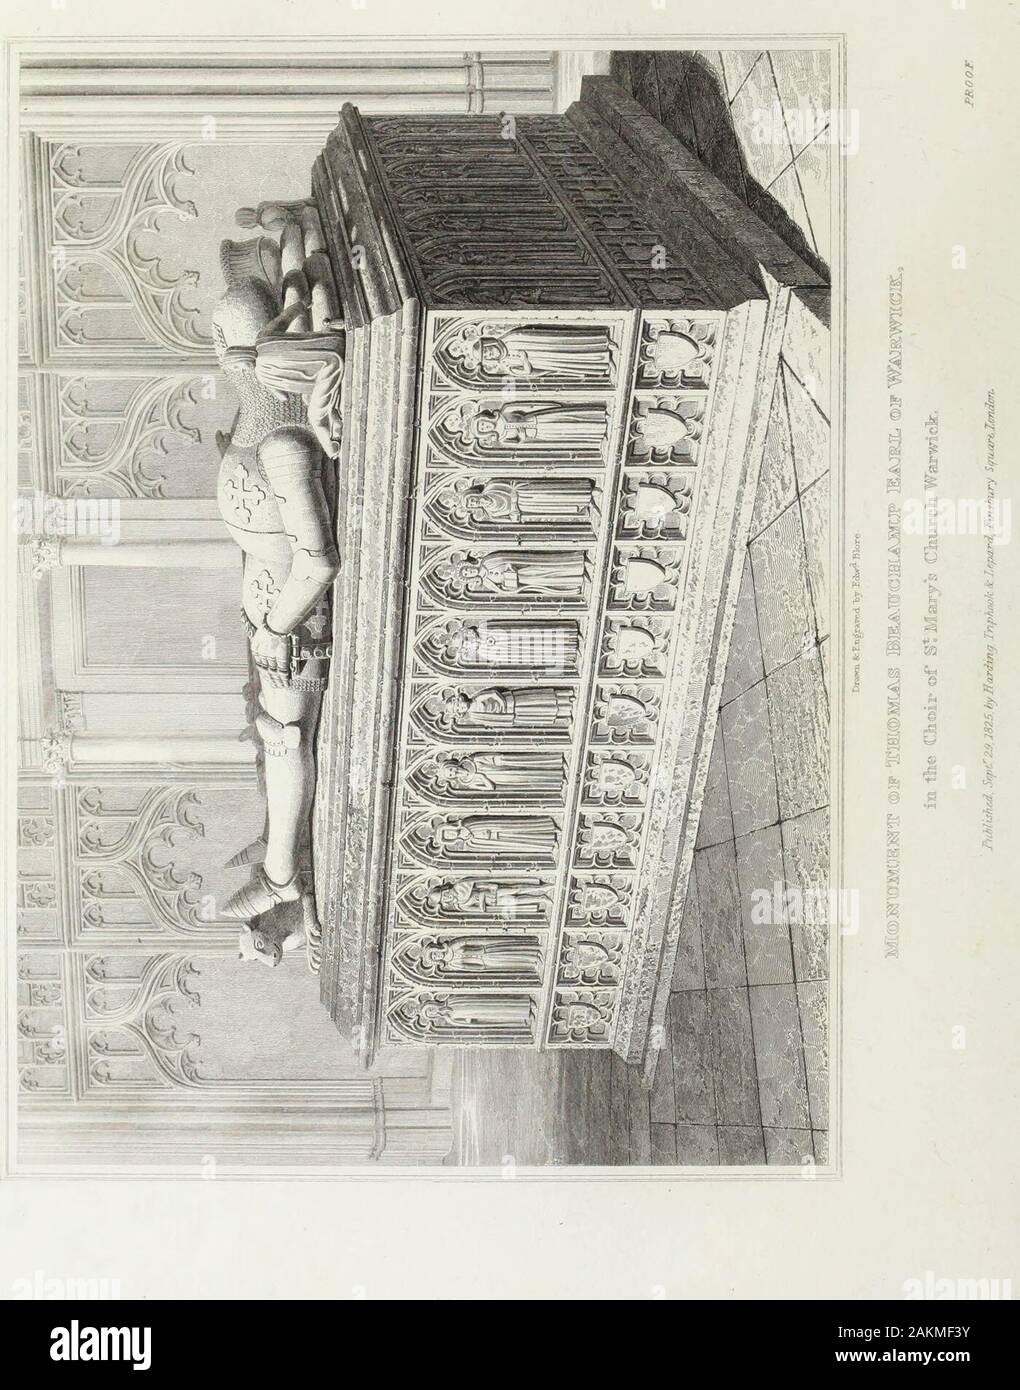 The monumental remains of noble and eminent persons : comprising the sepulchral antiquities of Great Britain . iy Harding irZcpard fpisbttry Square.Icndcn.. THOMAS BEAUCHAMP, EARL OF WARWICK. ob. 1370.monument at warwick. Thomas, eldest son of Guy, Earl of Warwick, by Alice, daugh-ter of Ralph de Tony, of Flamsted, in Hertfordshire, was borain Warwick Castle, in 1313 or 1314, having for sponsors, at hisbaptism, Thomas, Earl of Lancaster, his brother Henry, andThomas de Warington, Prior of Kenilworth. His father dyingbefore he was two years old, Dugdale suspects that Hugh LeDespencer, who had p Stock Photo